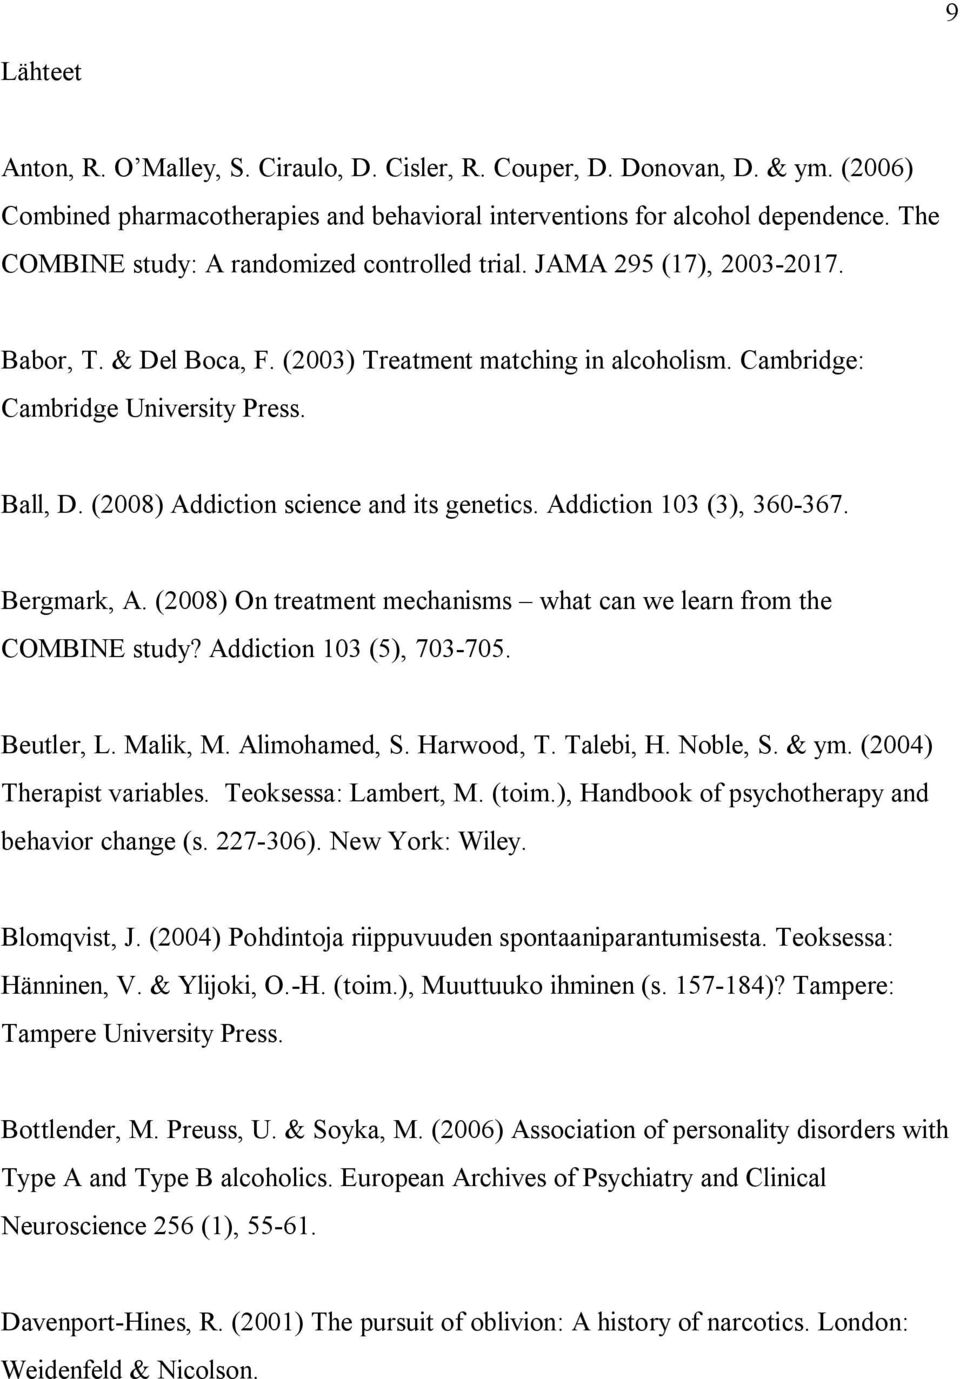 (2008) Addiction science and its genetics. Addiction 103 (3), 360-367. Bergmark, A. (2008) On treatment mechanisms what can we learn from the COMBINE study? Addiction 103 (5), 703-705. Beutler, L.